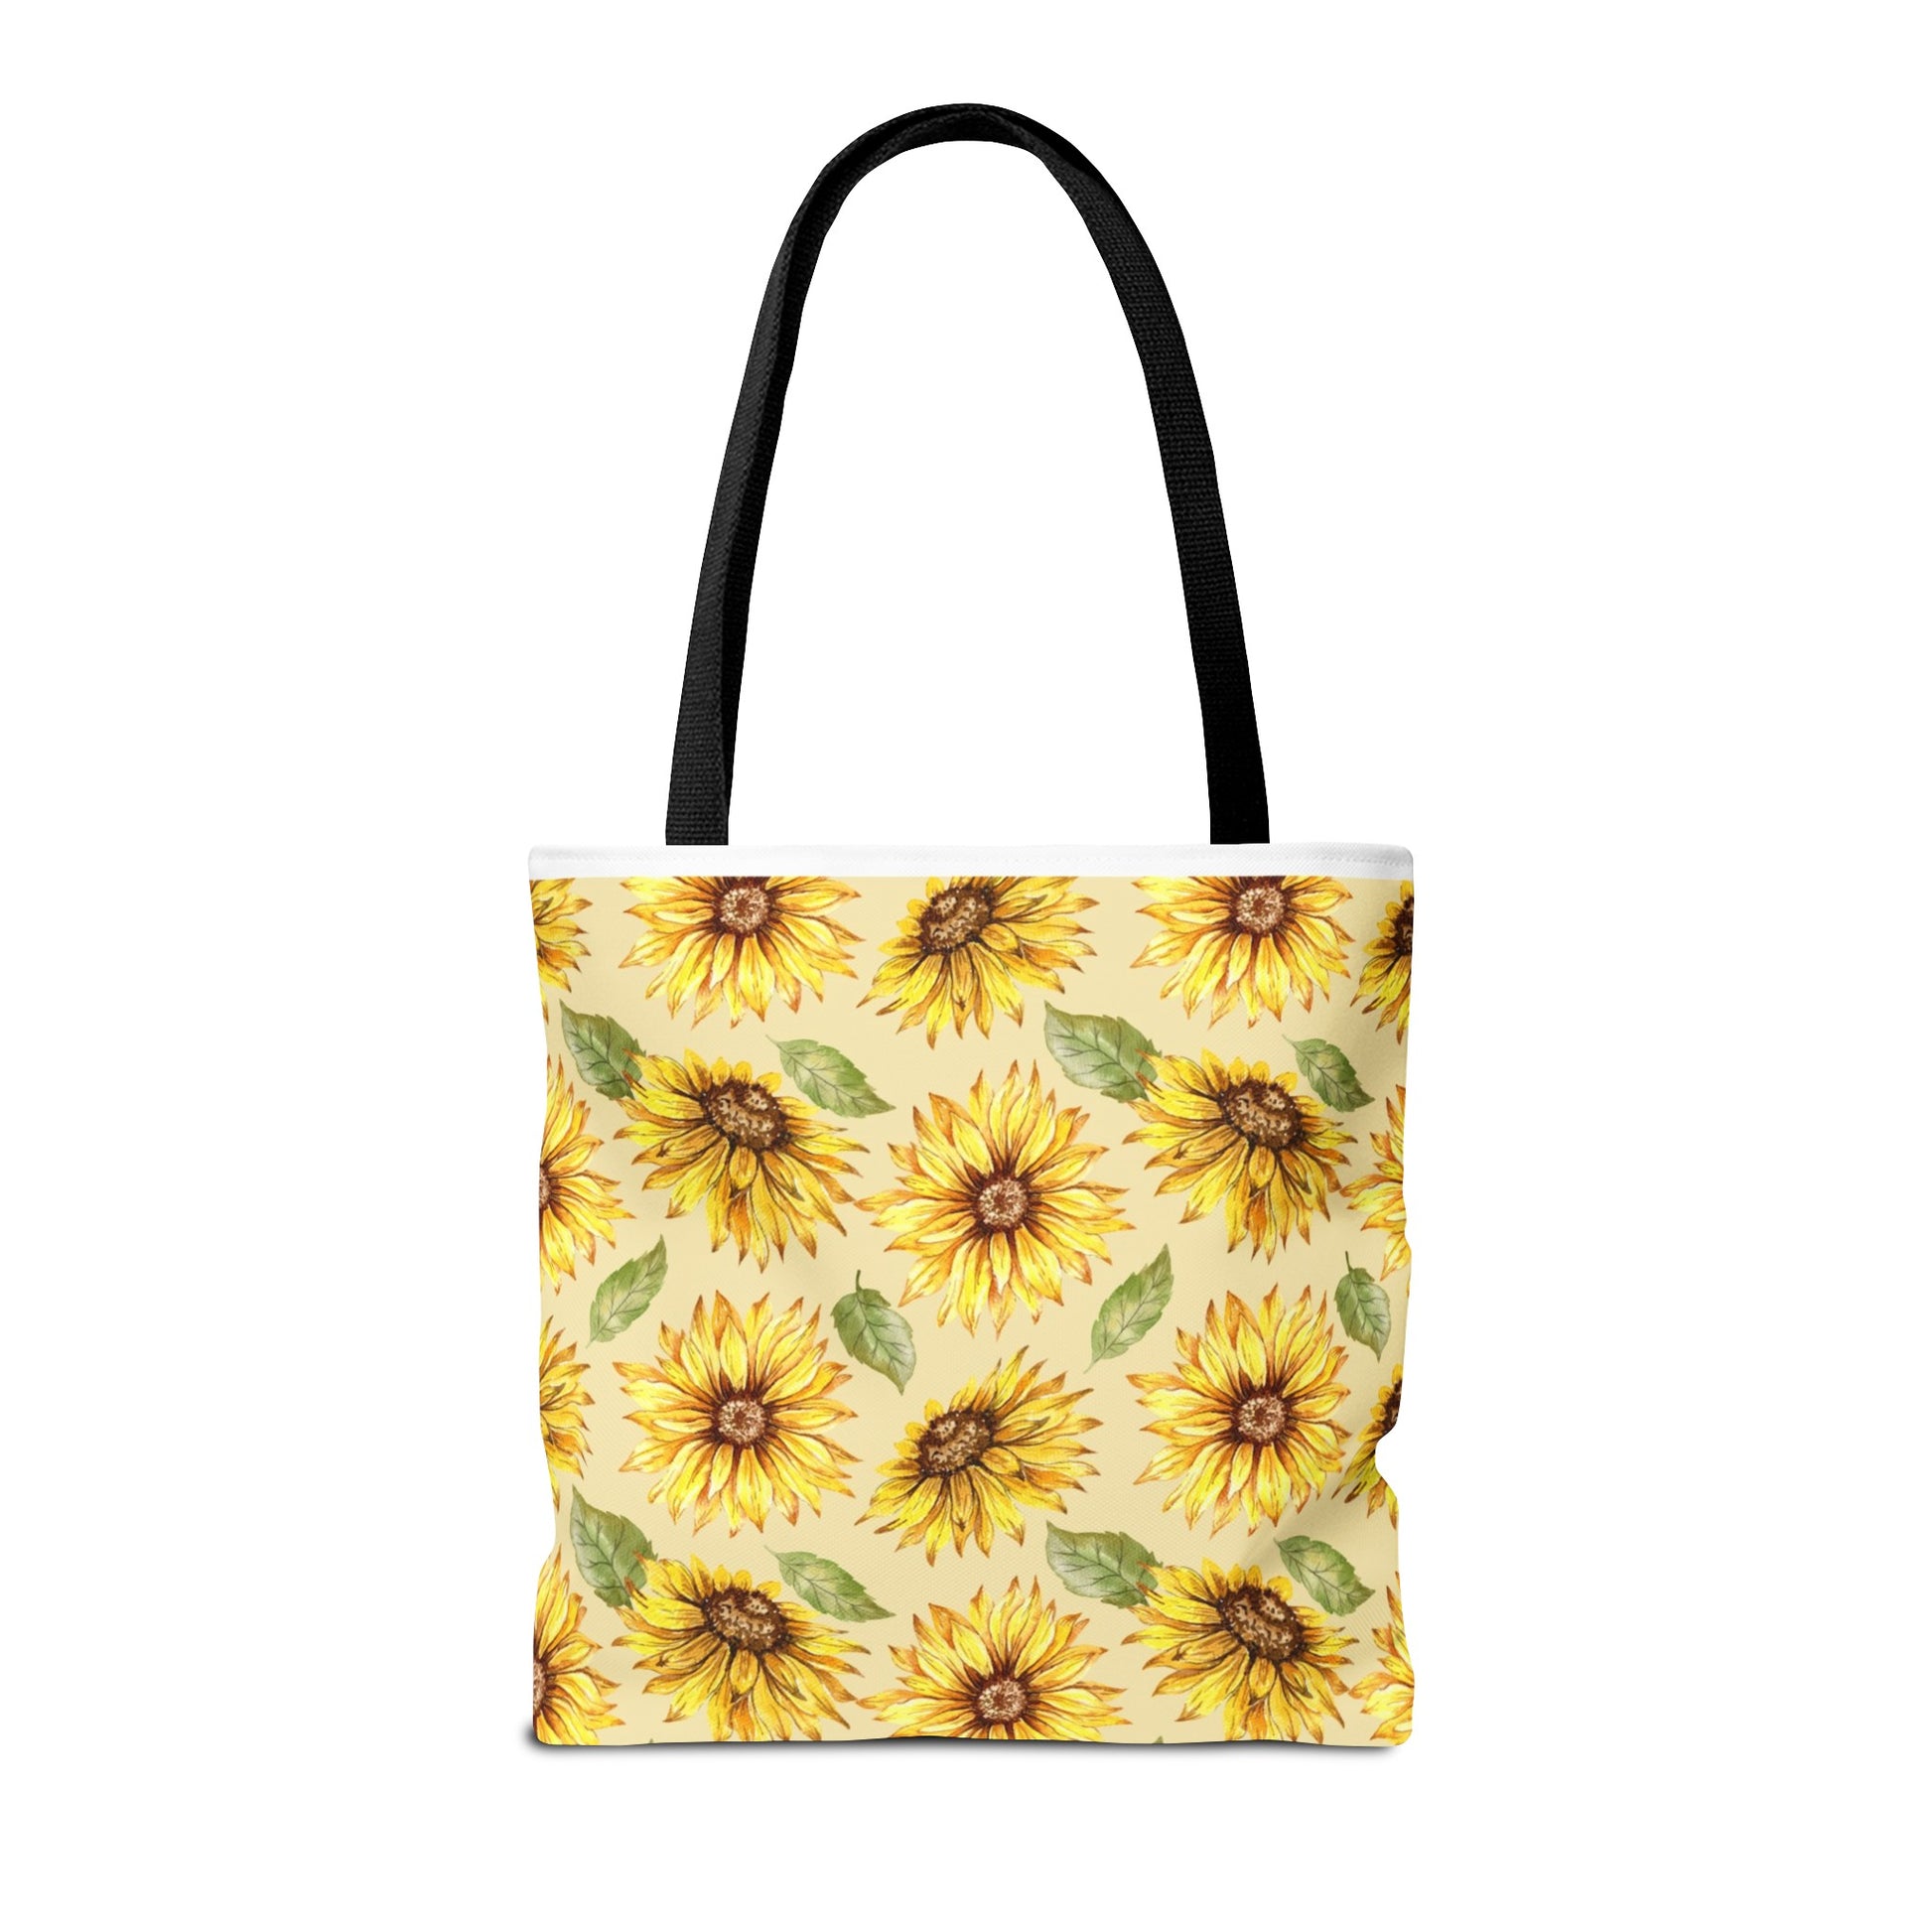 Printify's Yellow Floral Tote Bag, featuring a sunflower print design on a yellow background and black handles, comes in 3 sizes and is made of polyester.